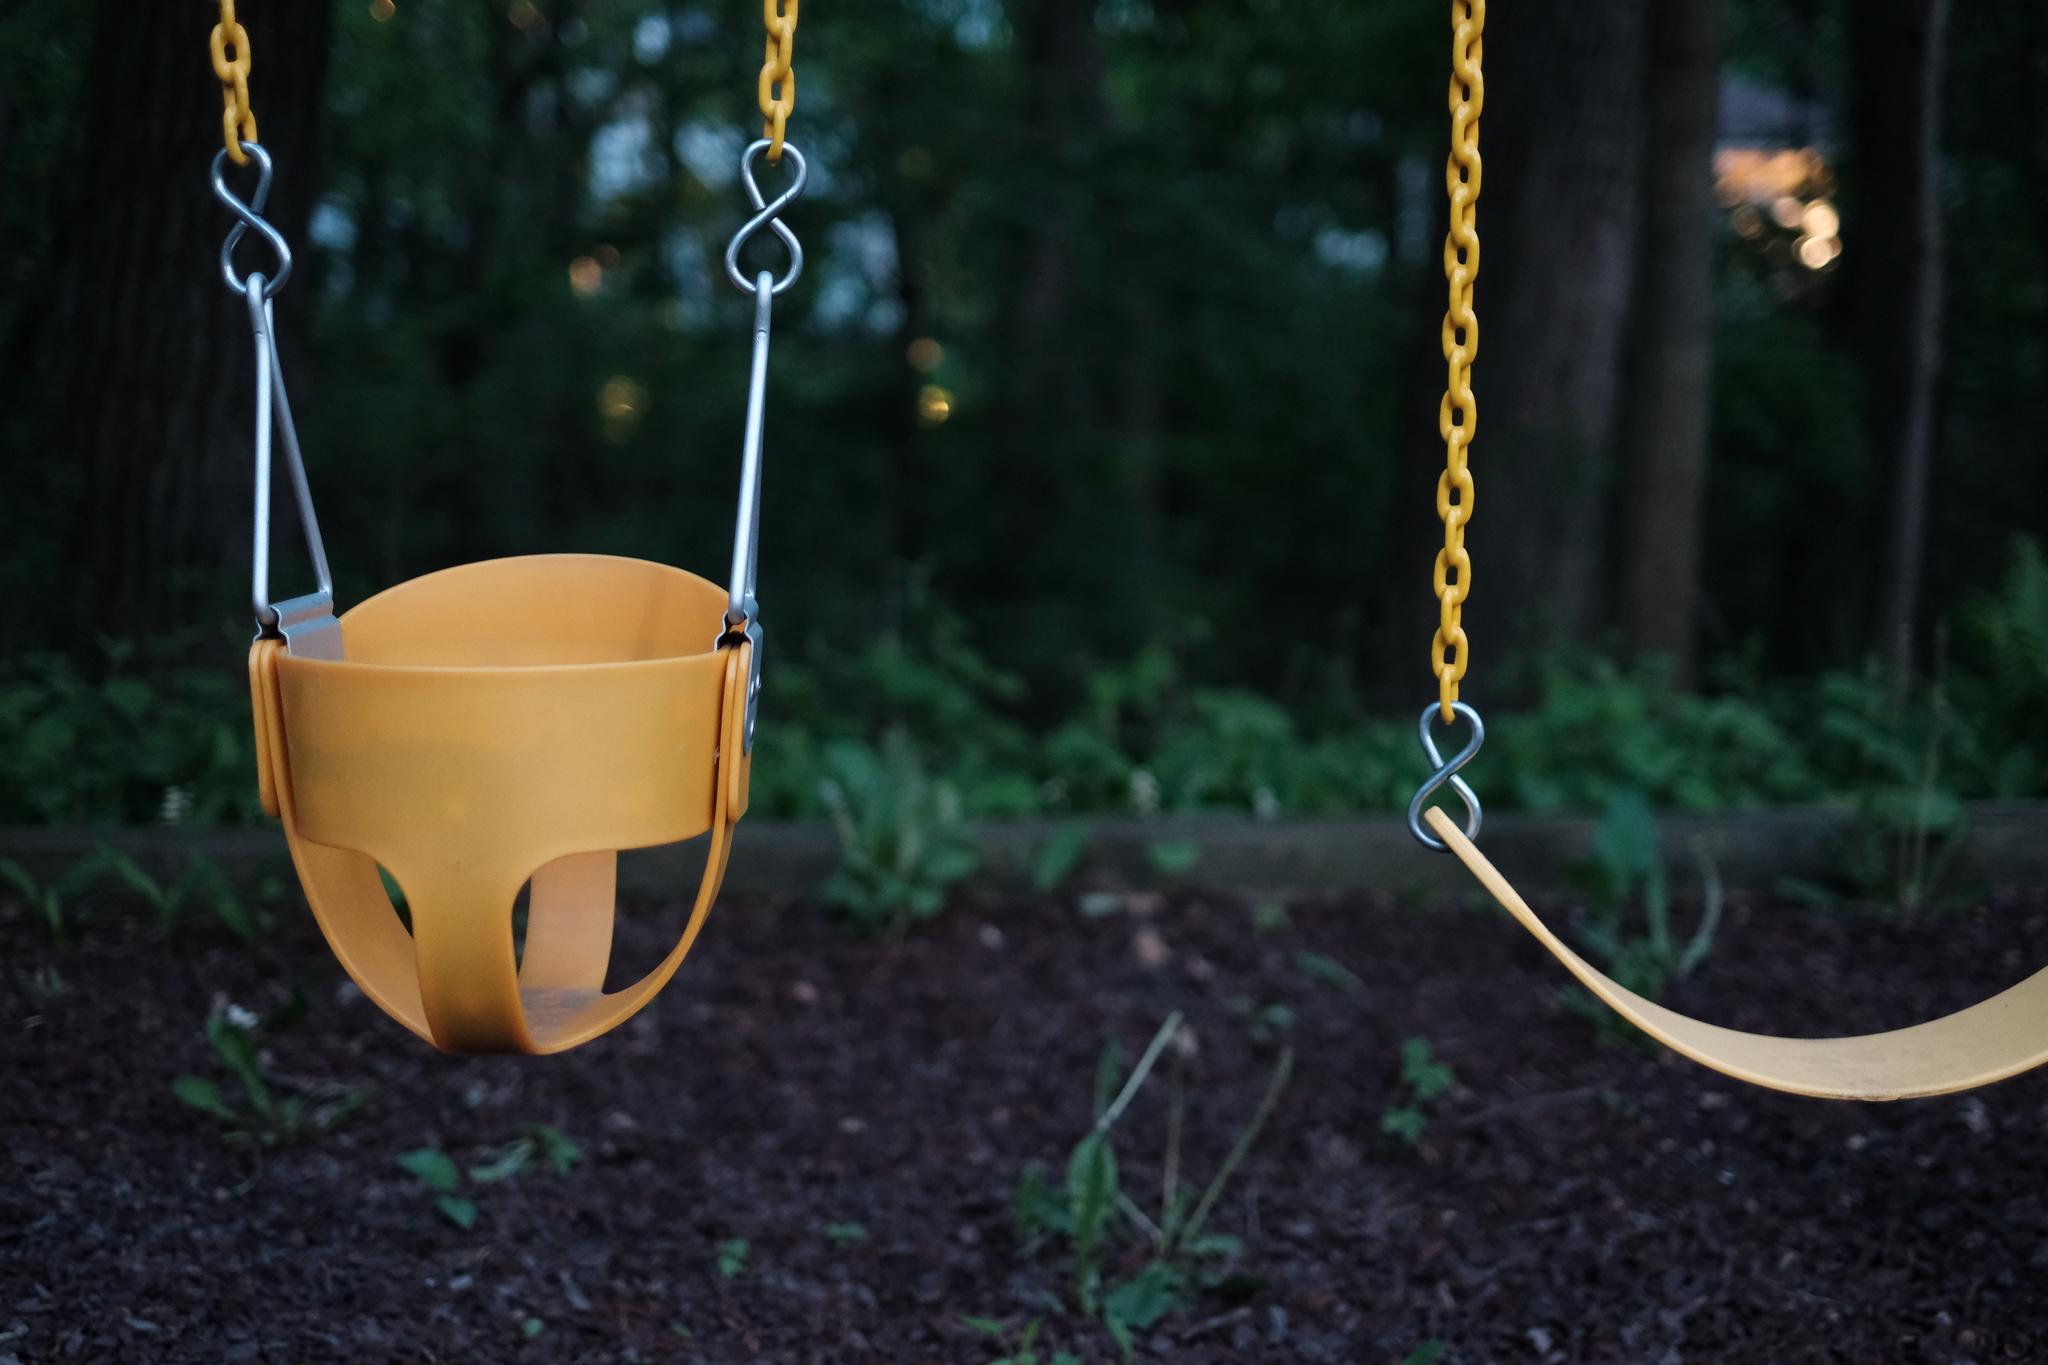 A yellow toddler swing hangs from metal chains against a blurred background of trees and foliage, suggesting a peaceful outdoor setting, possibly a park or a backyard